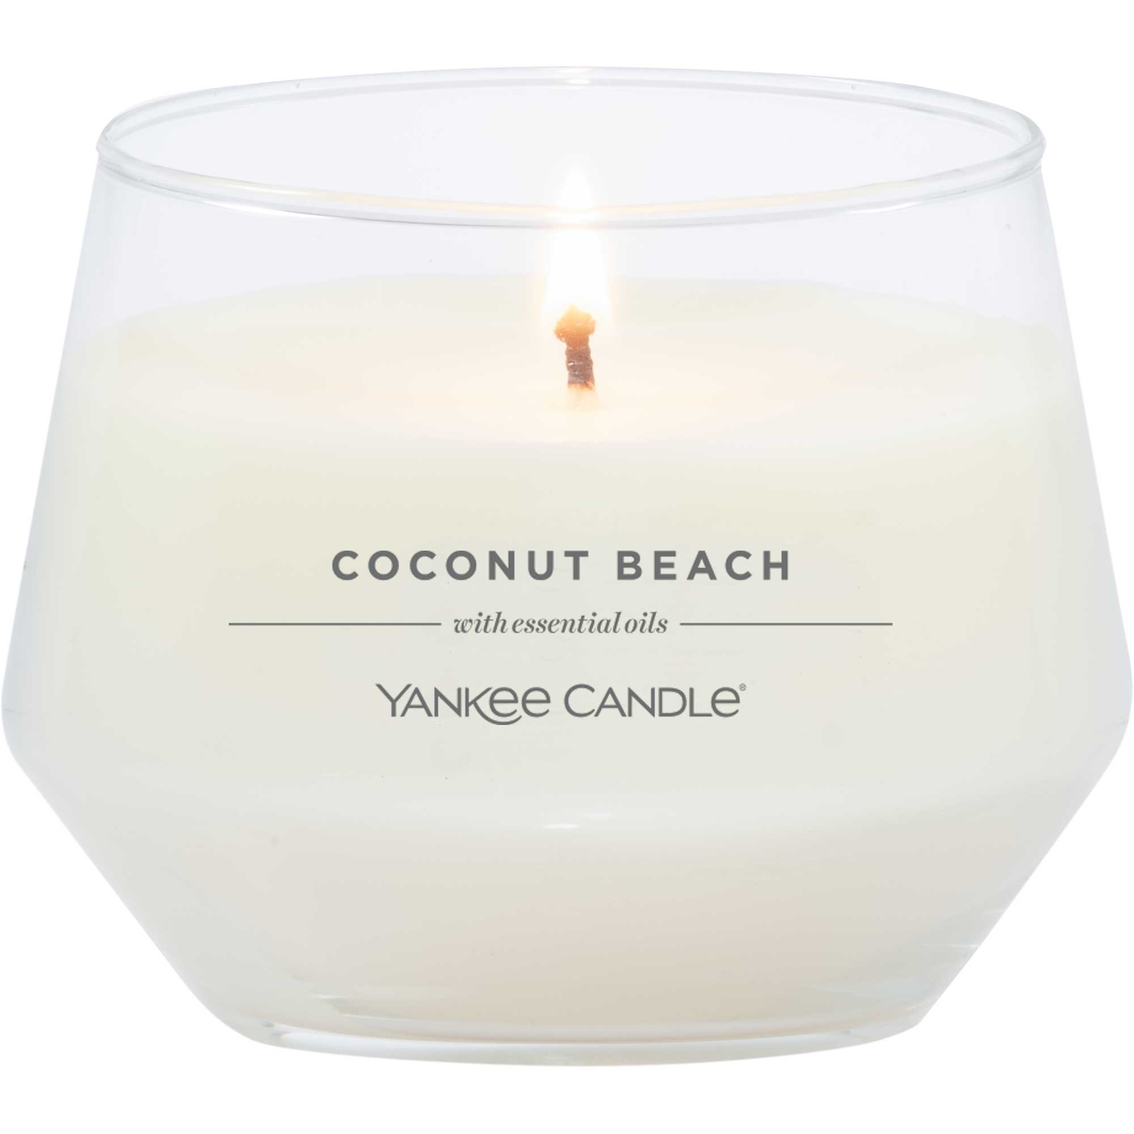 Yankee Candle Medium Studio Collection Coconut Beach Candle - Image 2 of 2